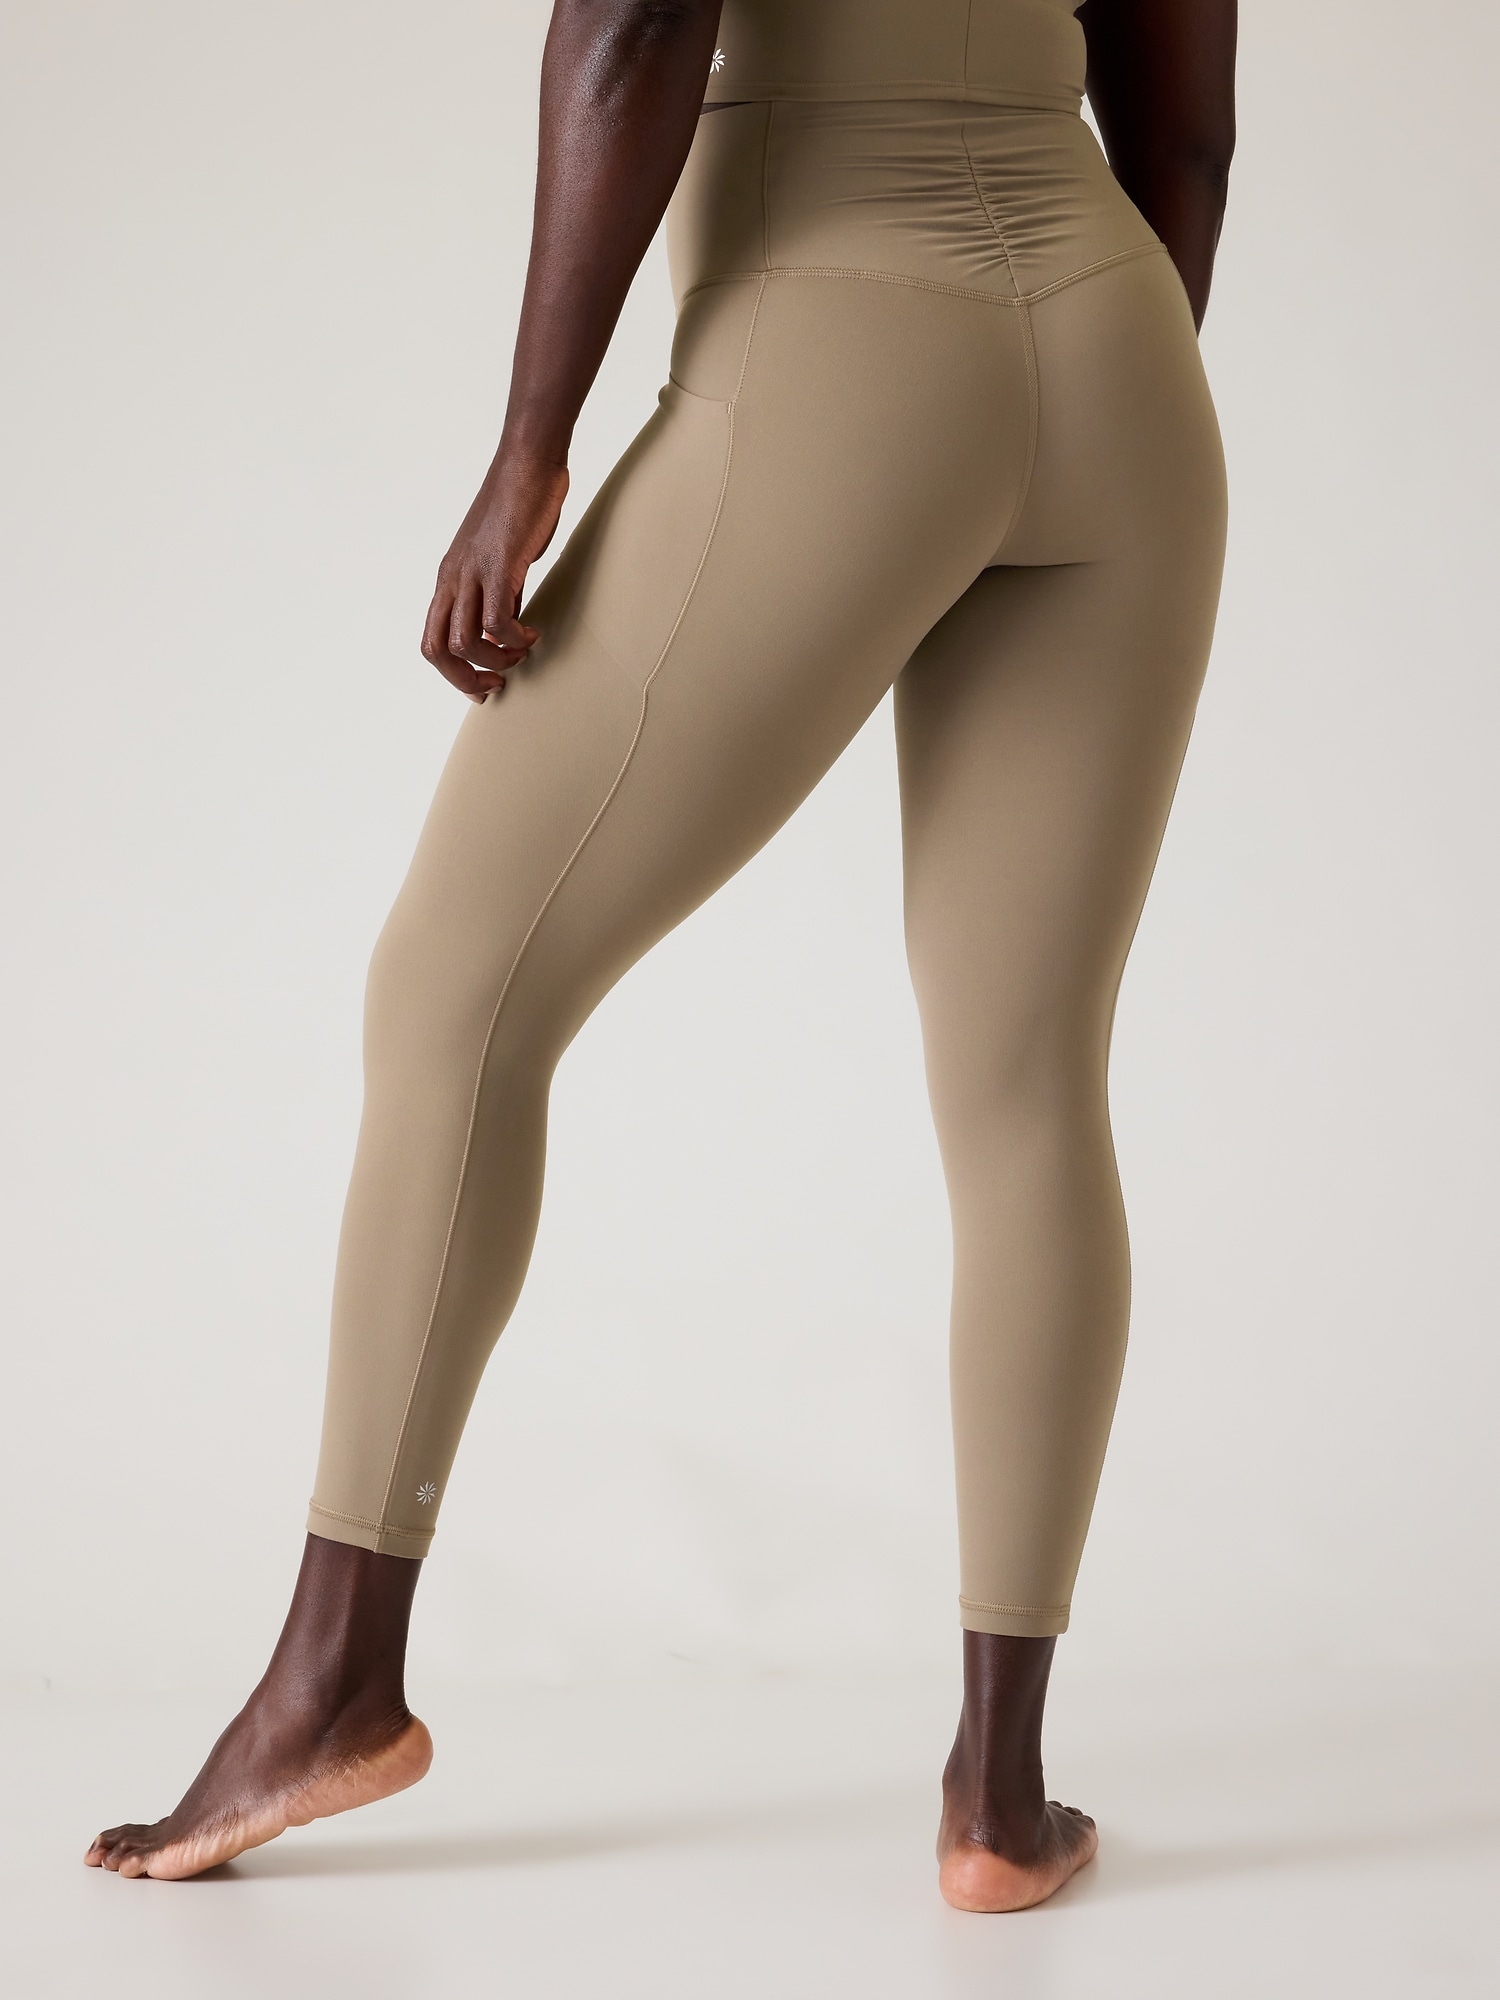 Promotional A4 Adult Polyester/Spandex Compression Tight $24.21